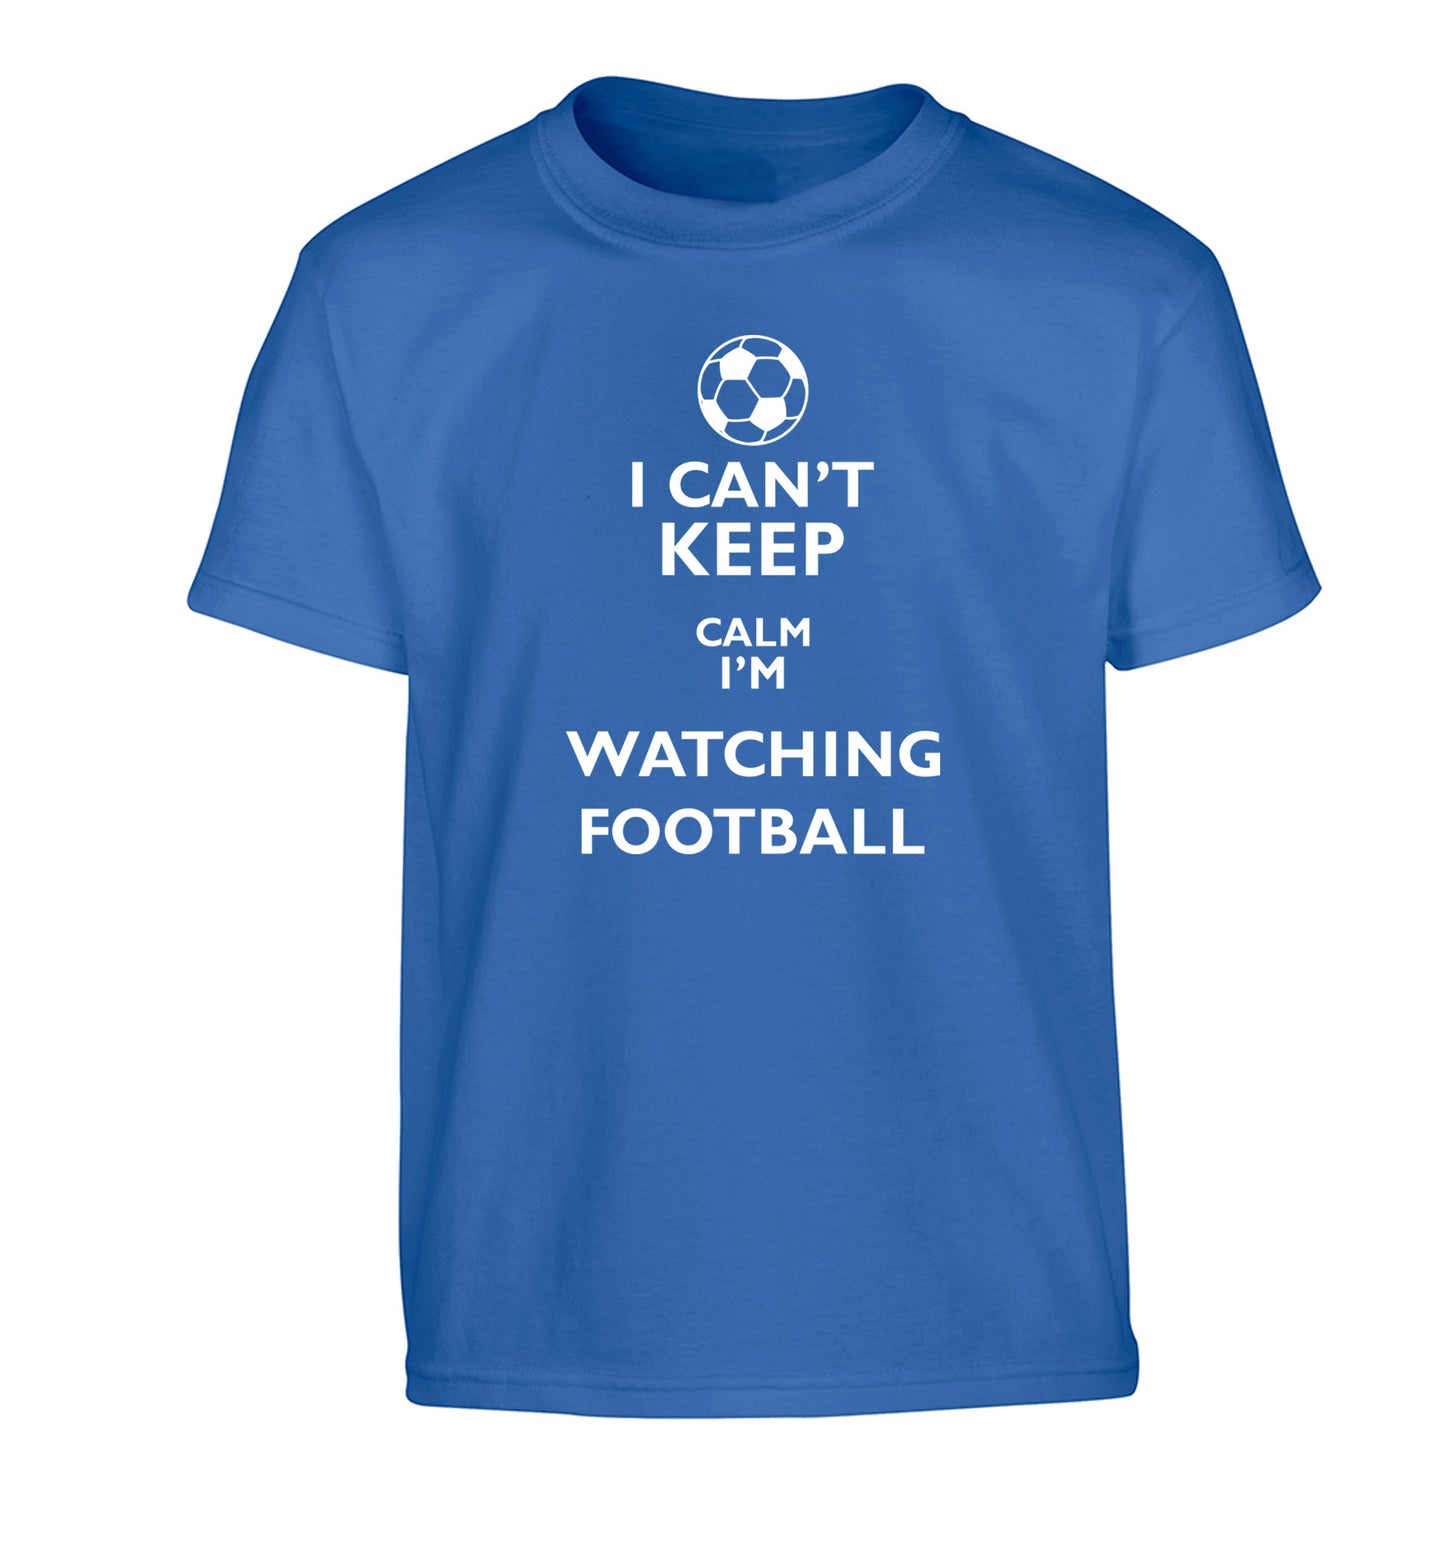 I can't keep calm I'm watching the football Children's blue Tshirt 12-14 Years